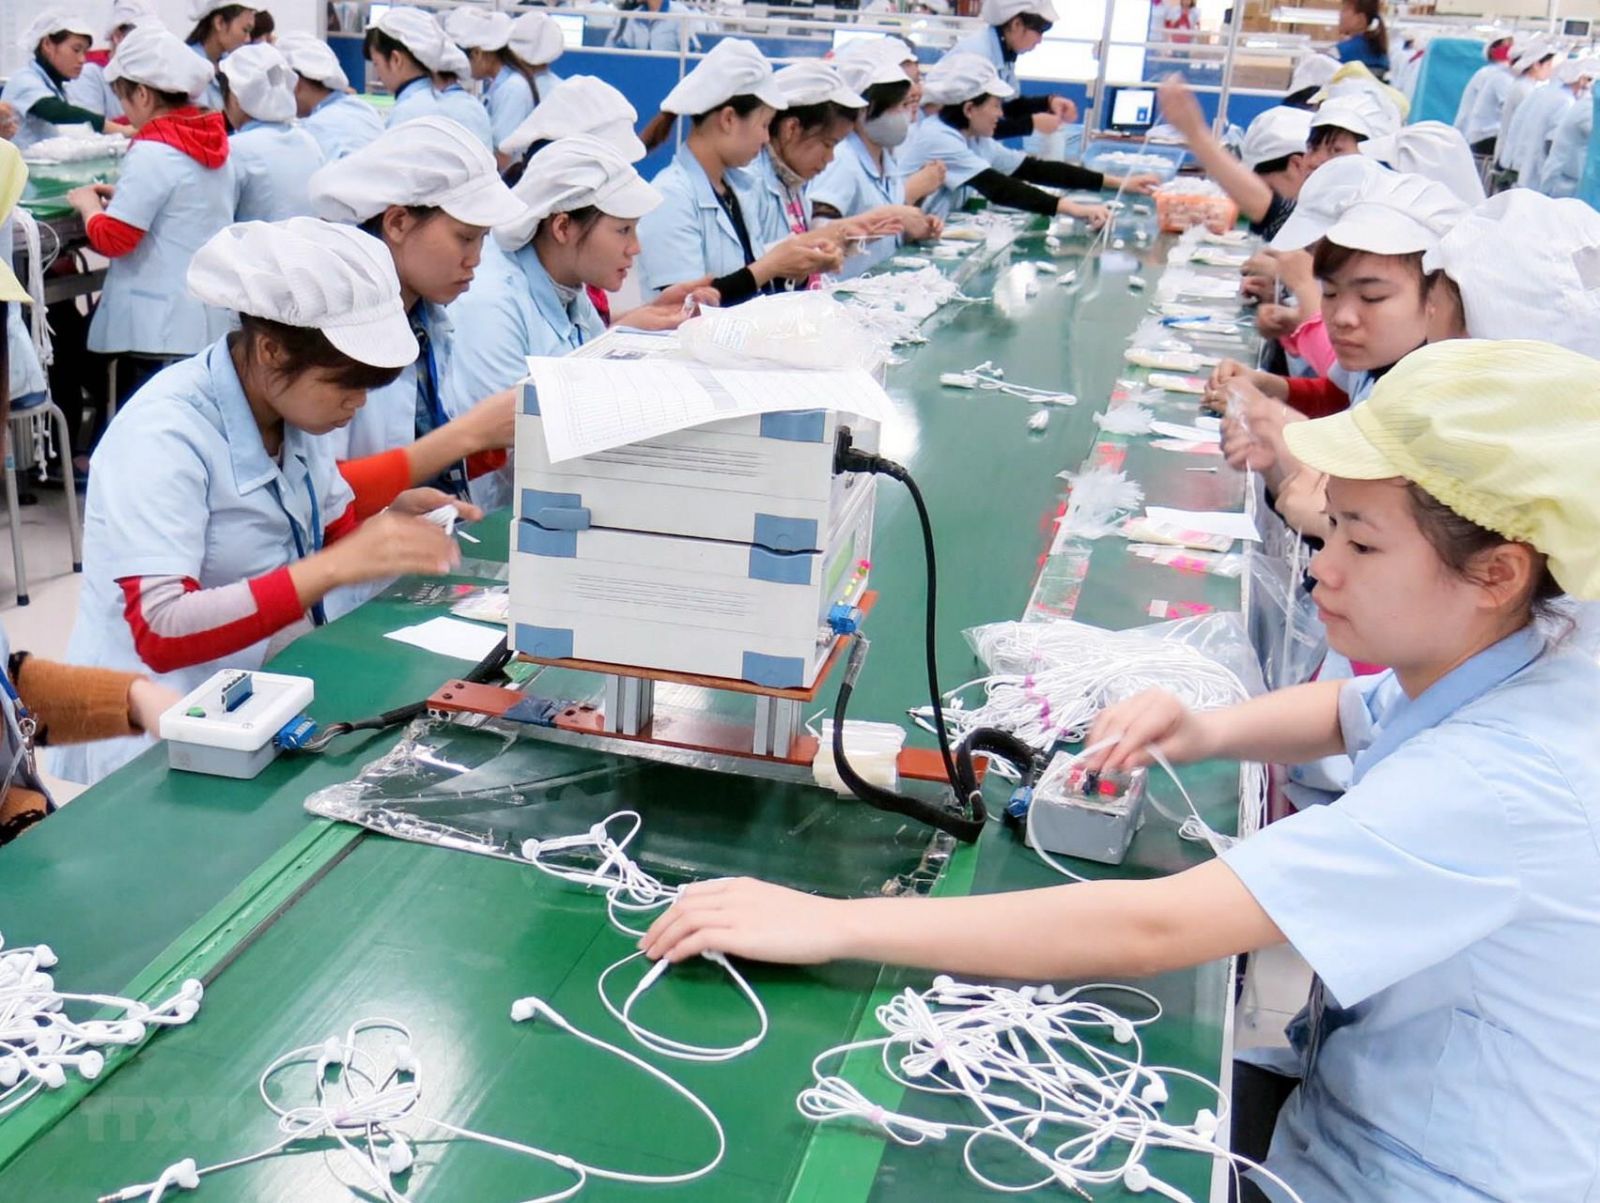 Workers produce earphones at a plant owned by electronics giant Samsung Vietnam. Vietnam enjoy considerable advantages in the production shift away from China. (Photo: VNA)